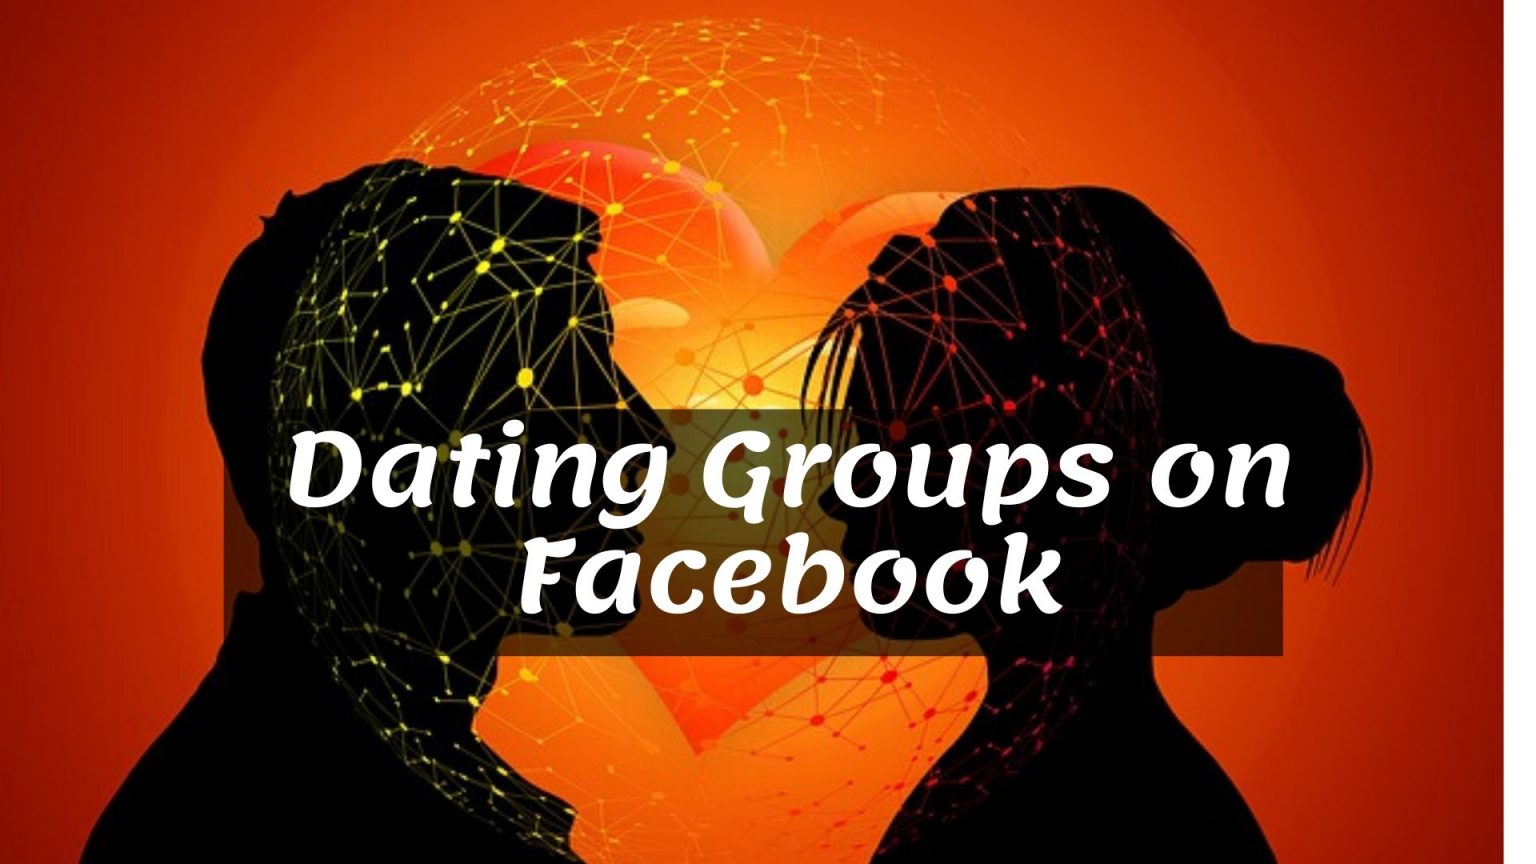 list of usa dating groups on facebook